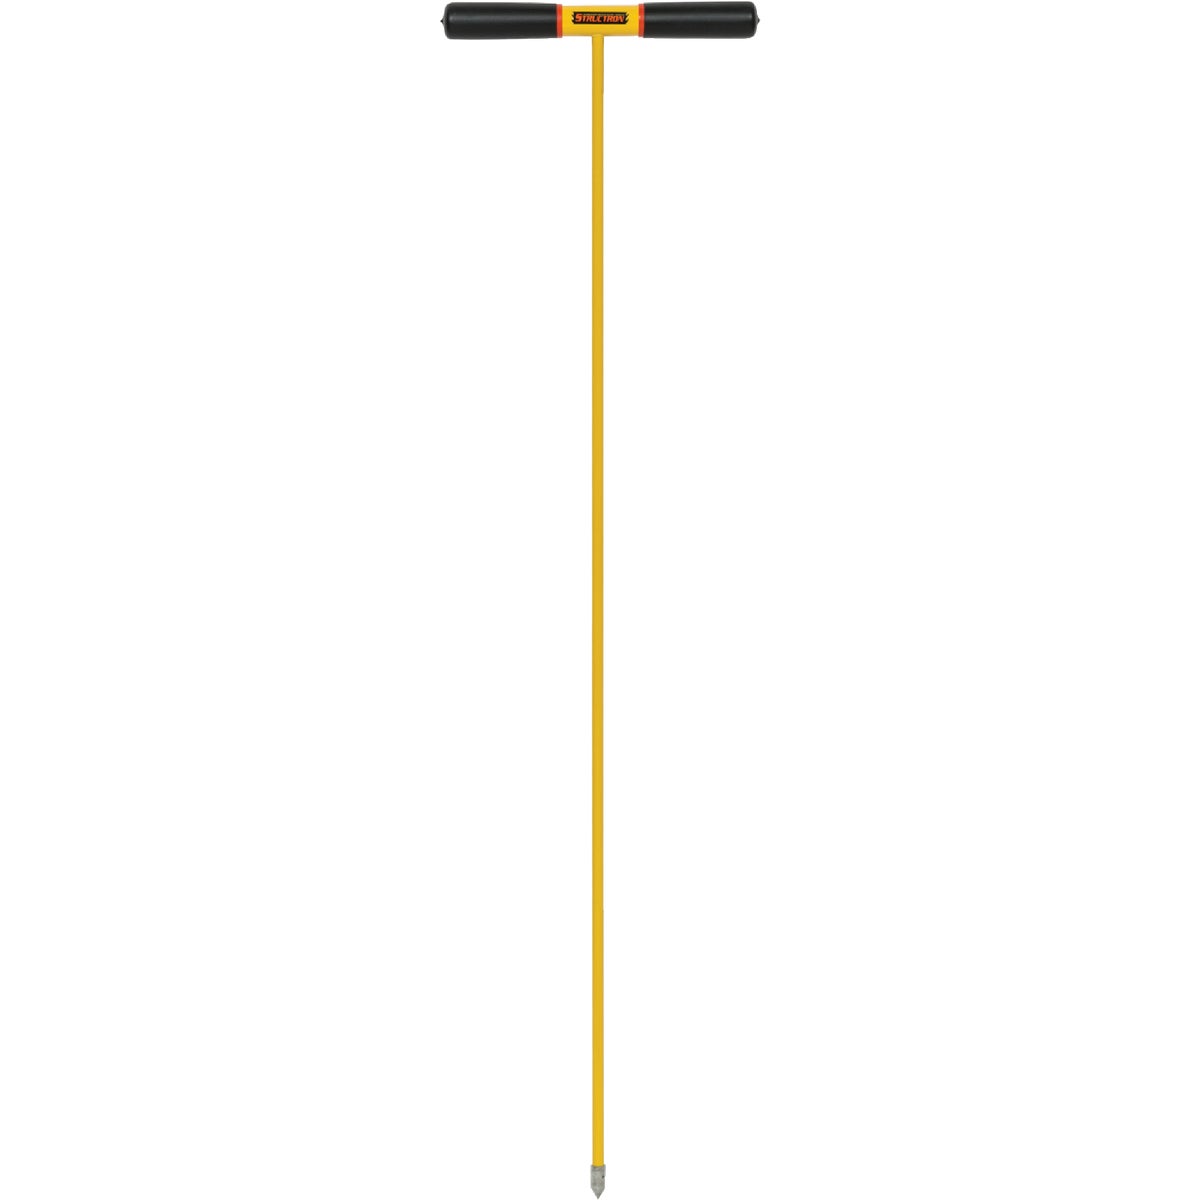 Item 708087, S600 Power Soil Probe is a safe, non-conductive tool for locating 